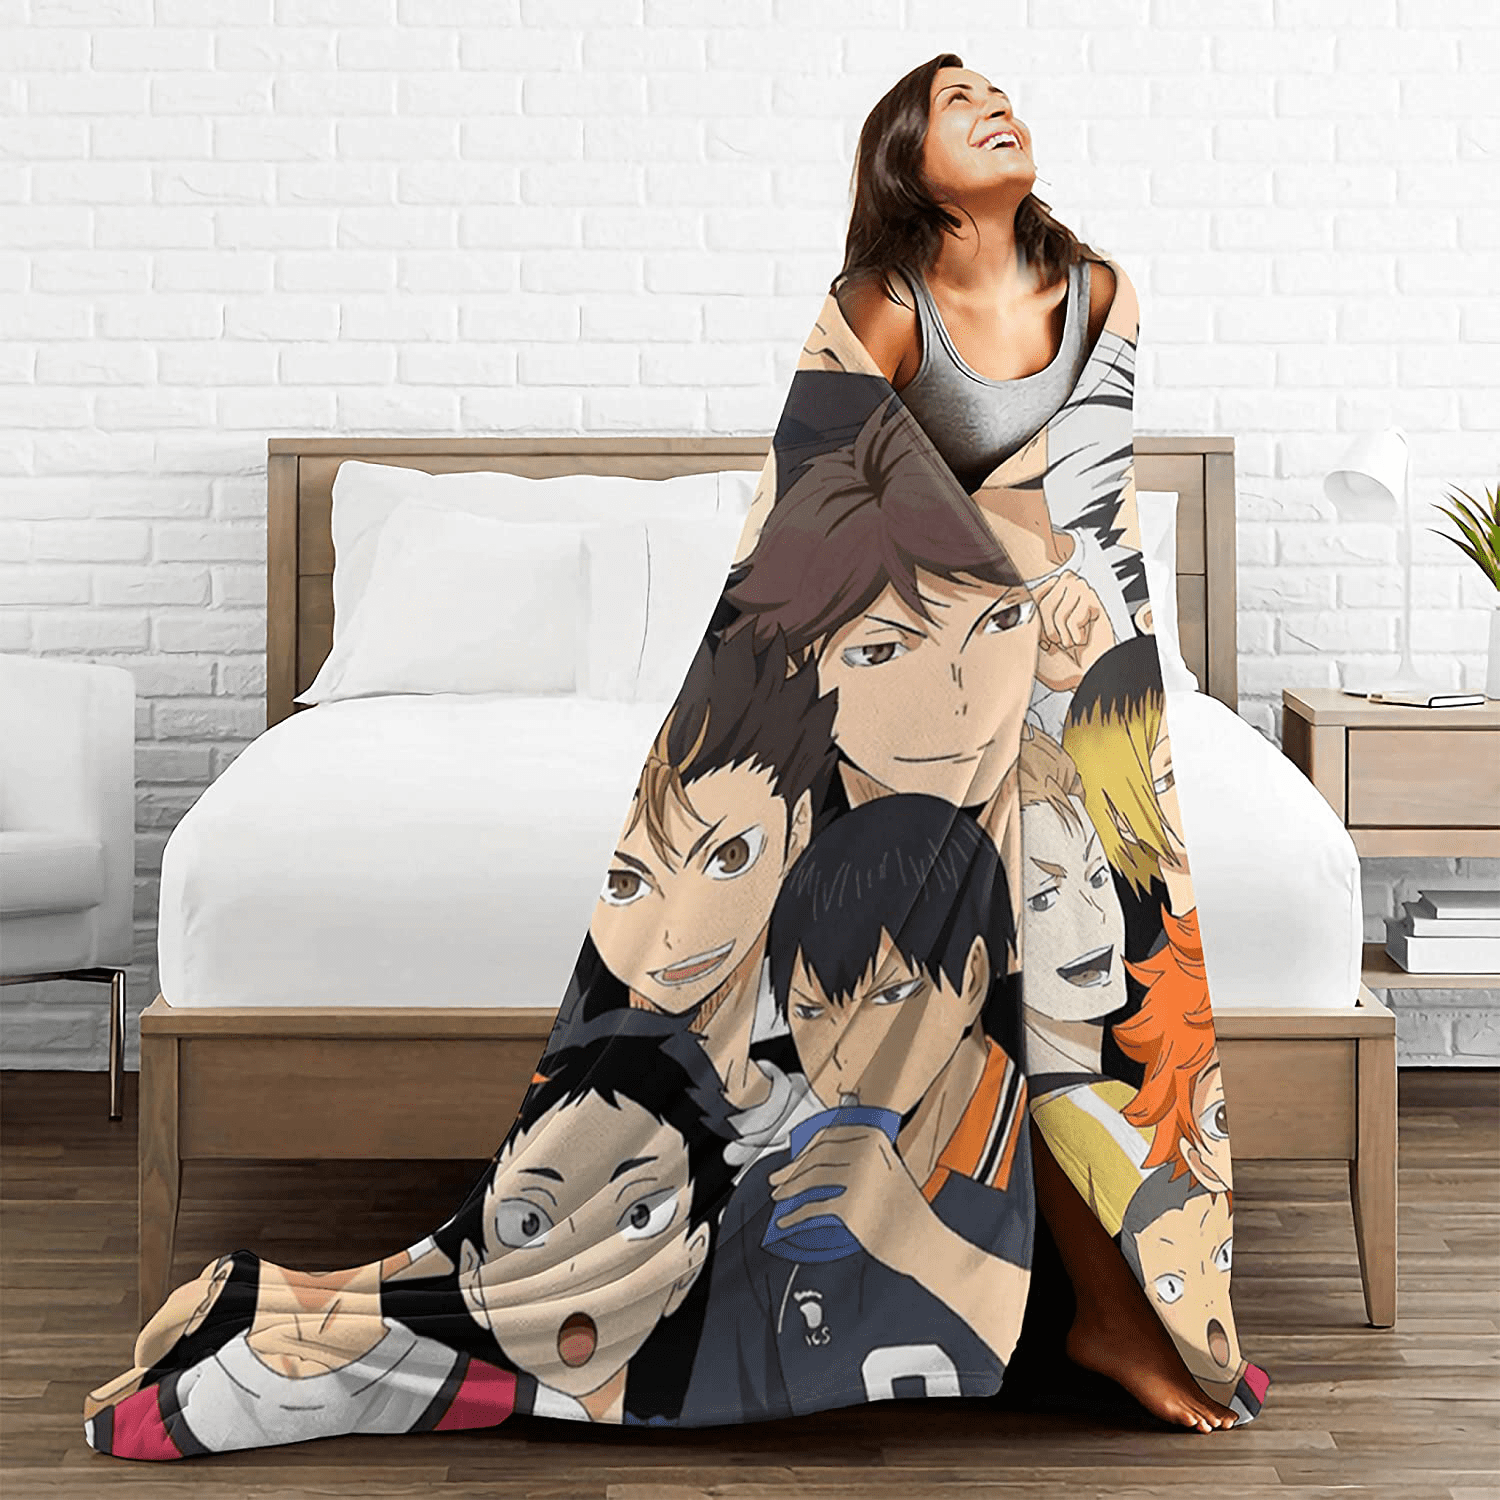 Super Soft Light Weight Throw Blanket Akaashi Keiji Manga Collage Summer Quilt for Bed Couch Sofa 60X50 Medium for Teen